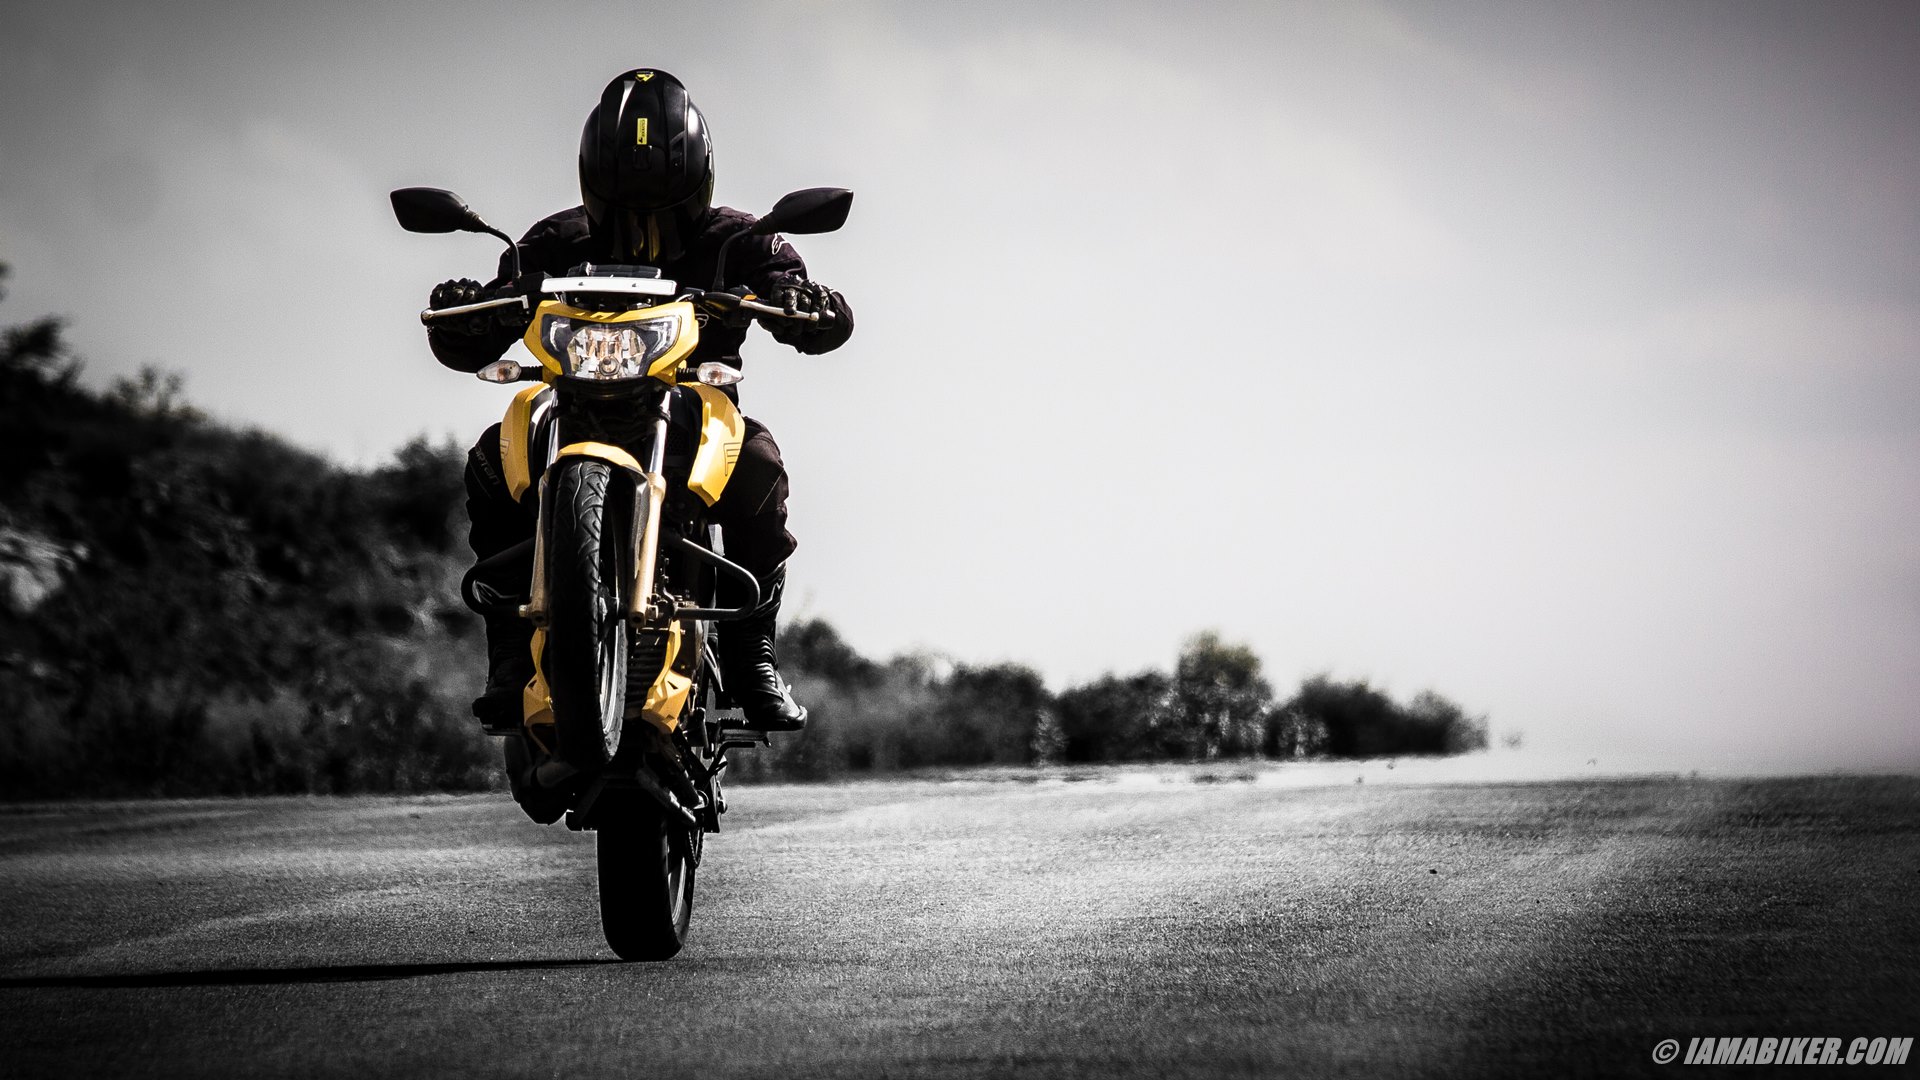 Apache RTR 200 HD wallpapers IAMABIKER   Everything Motorcycle 1920x1080